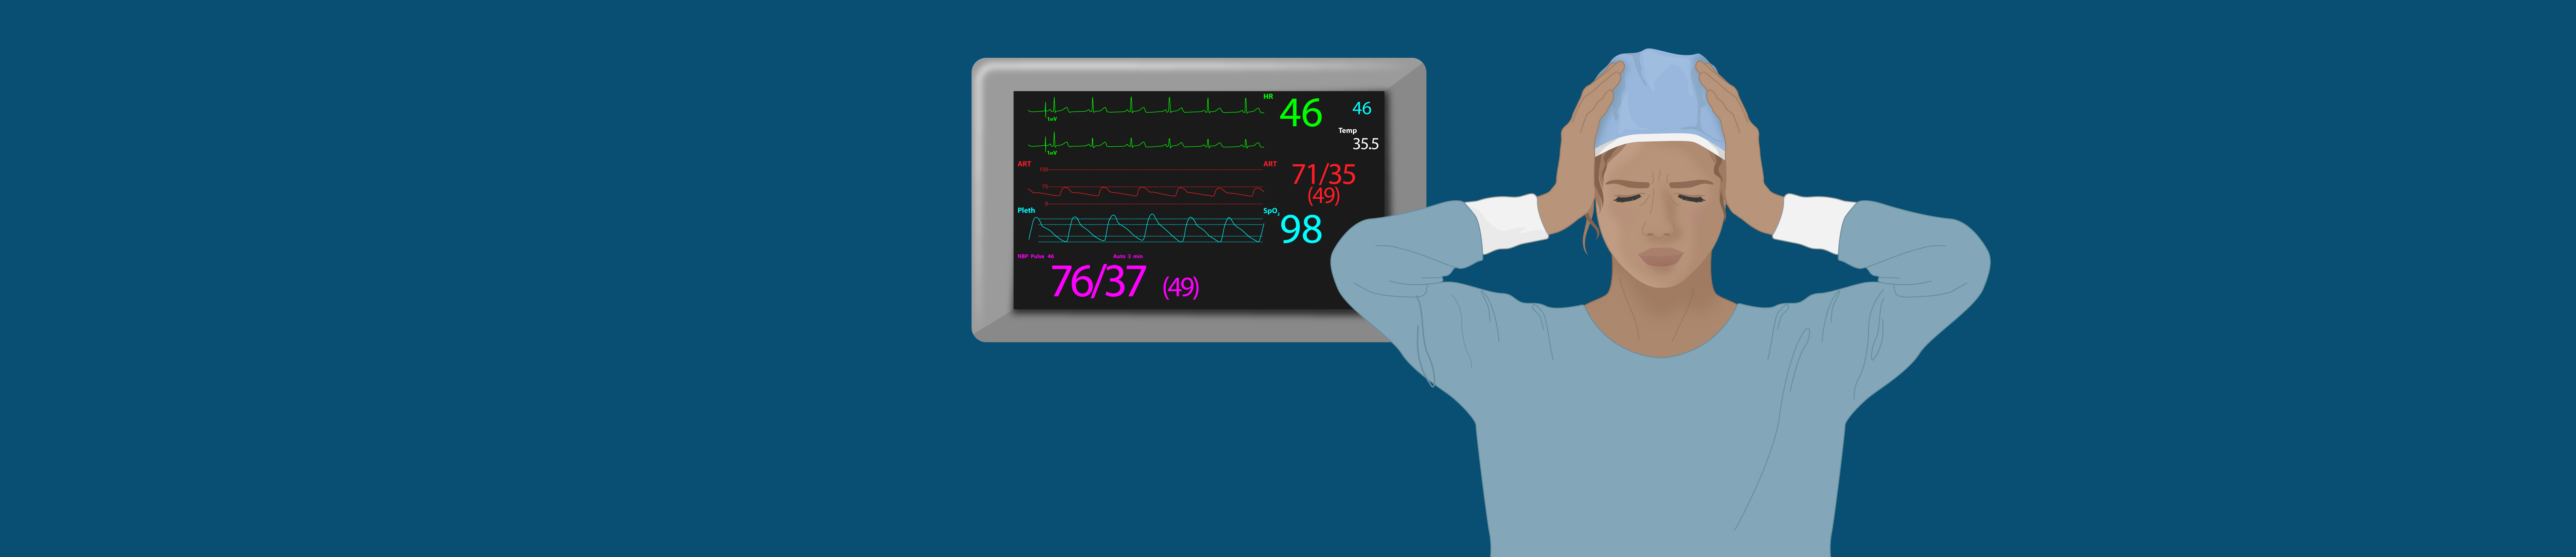 monitoring alerts, monitoring alarms, pulse oximetry sounds, EKG events, and your daily alarms can all contribute to alarm fatigue which risks patient safety.